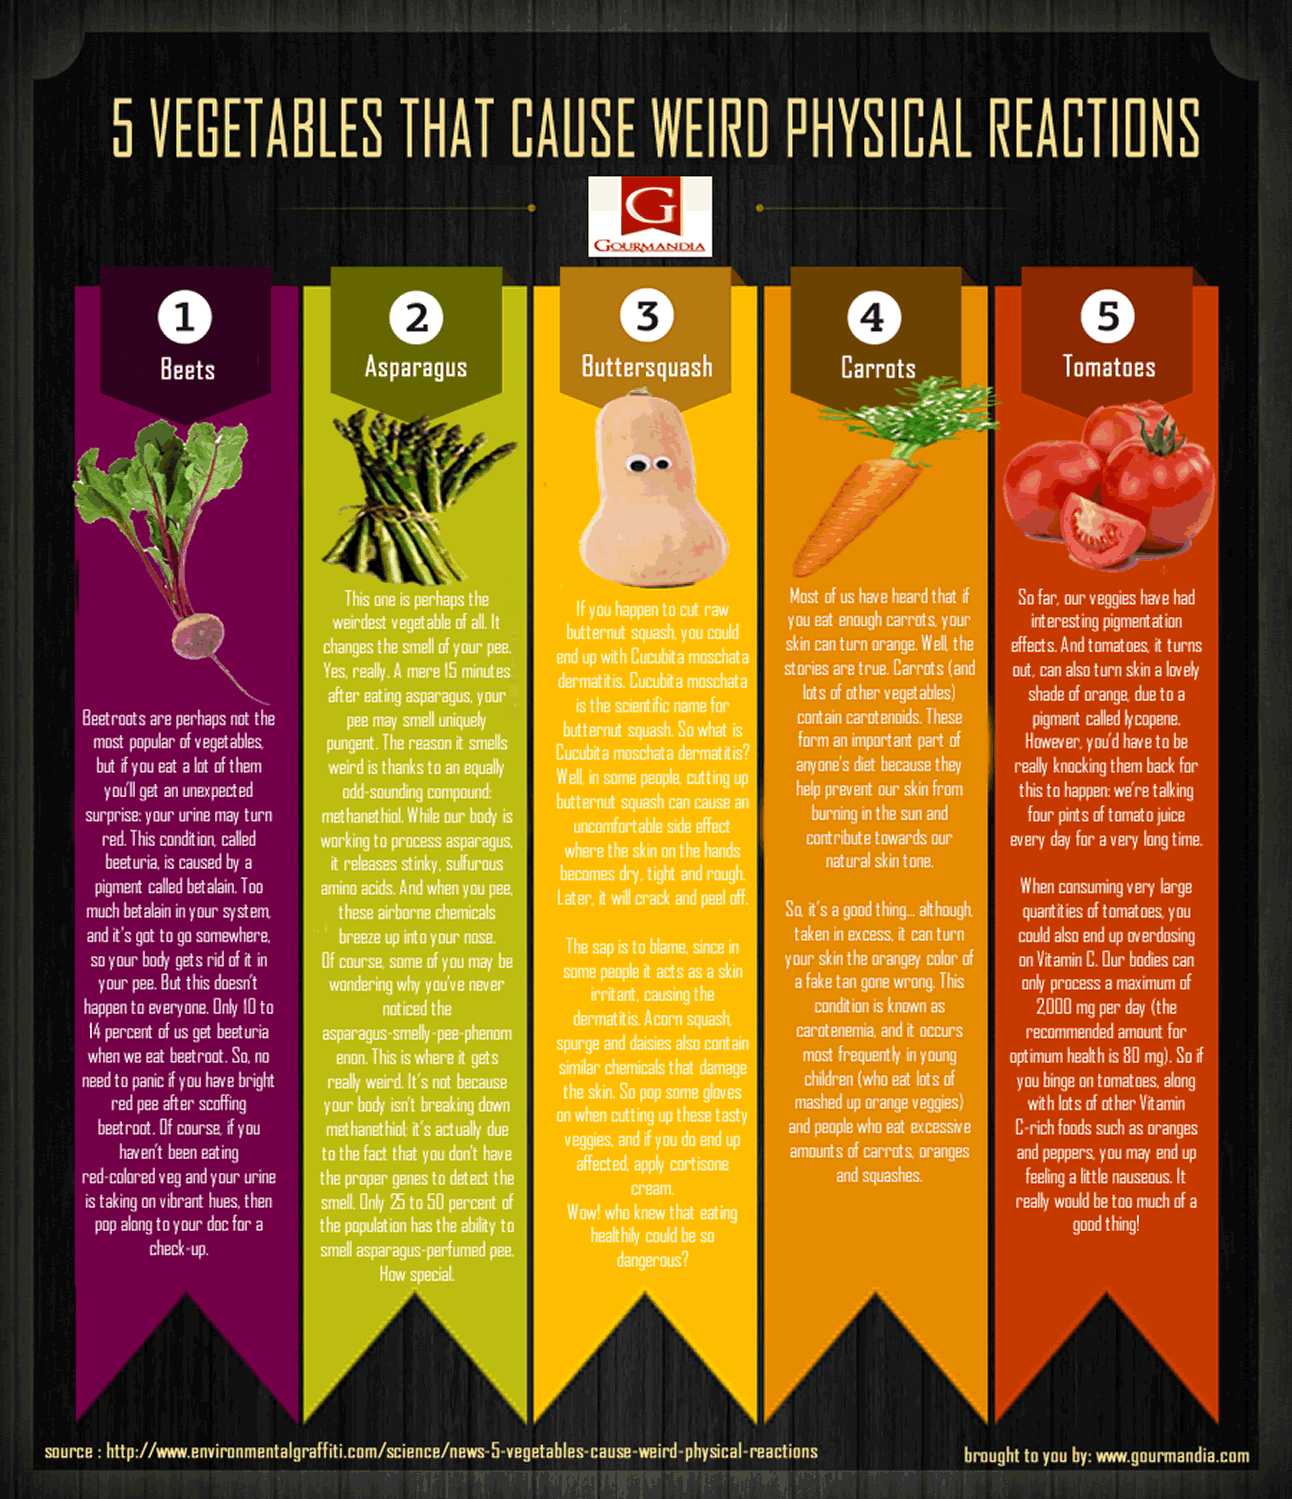 5 Veggies with Strange Physical Reactions